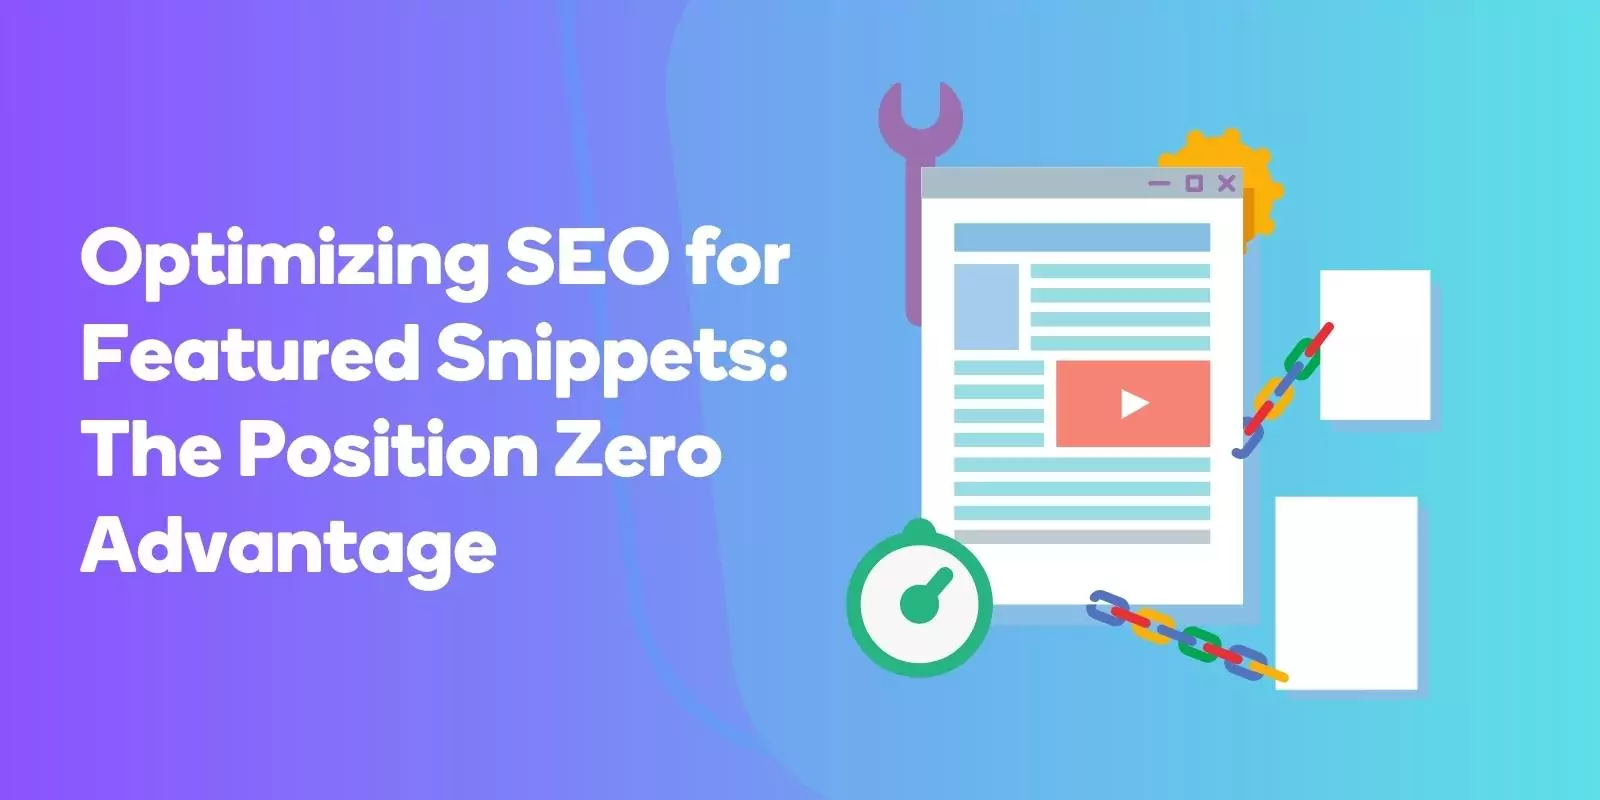 Optimizing SEO for Featured Snippets The Position Zero Advantage